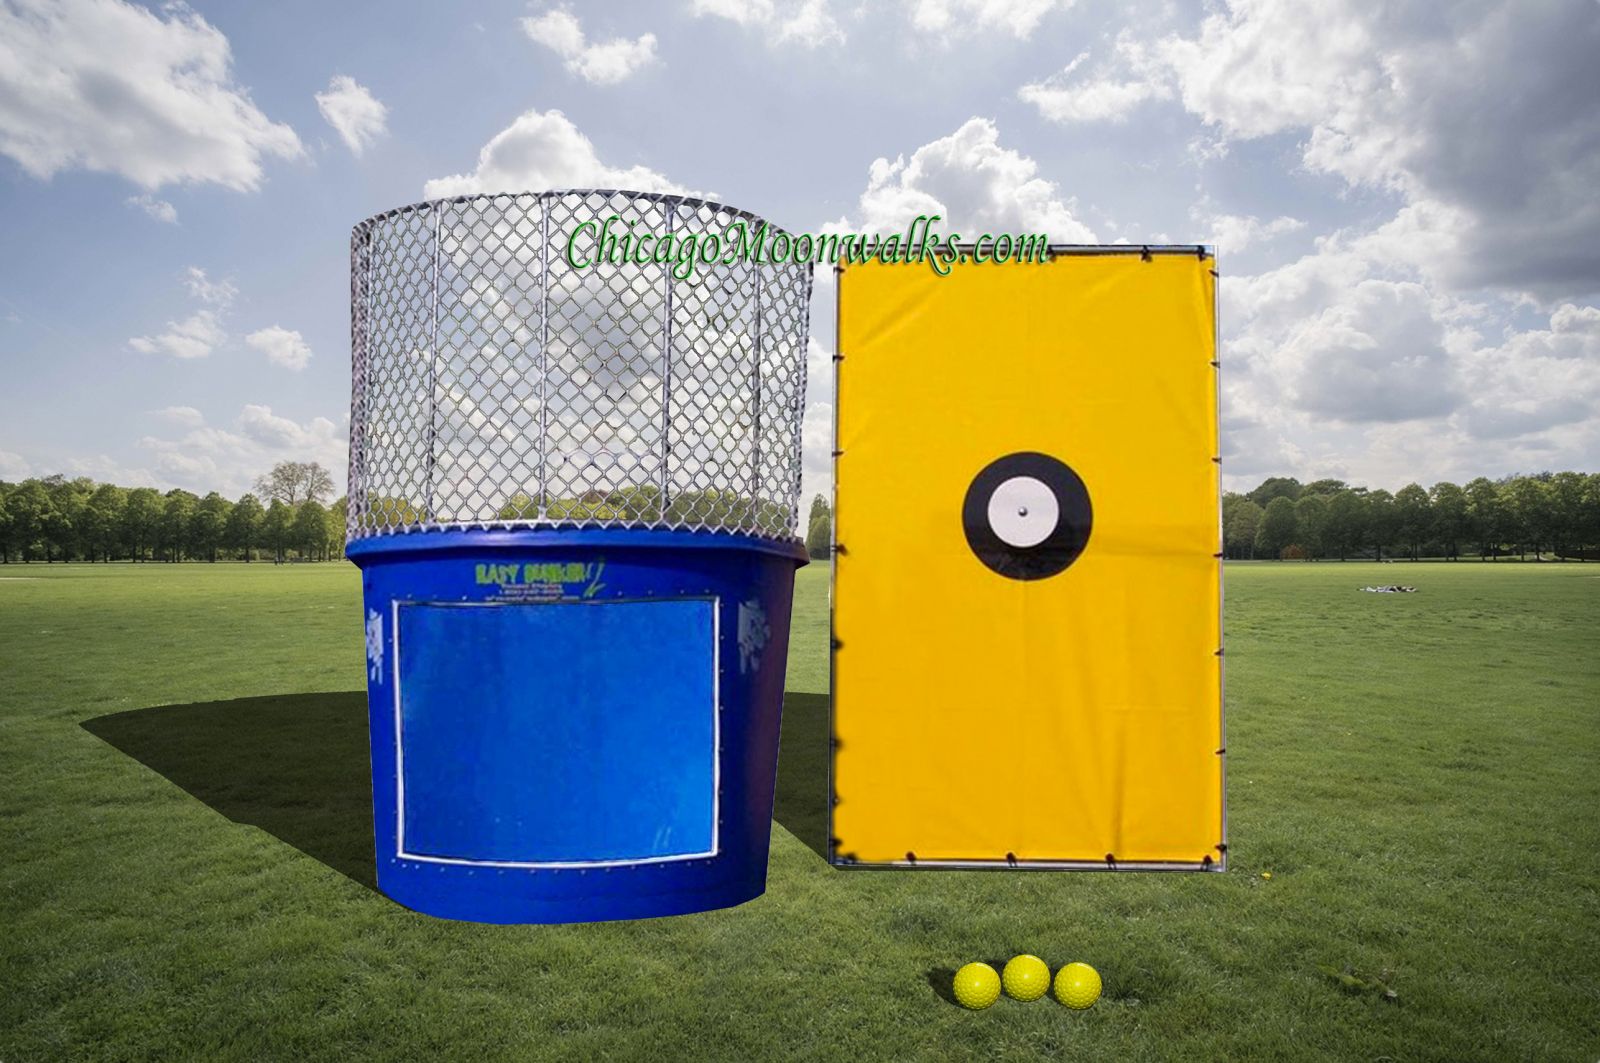 Dunk Tank Chicago  Rental, 500 Gallon Dunk tank Party rentals.  Great for Block Parties, Party Special Events, Family Reunions.